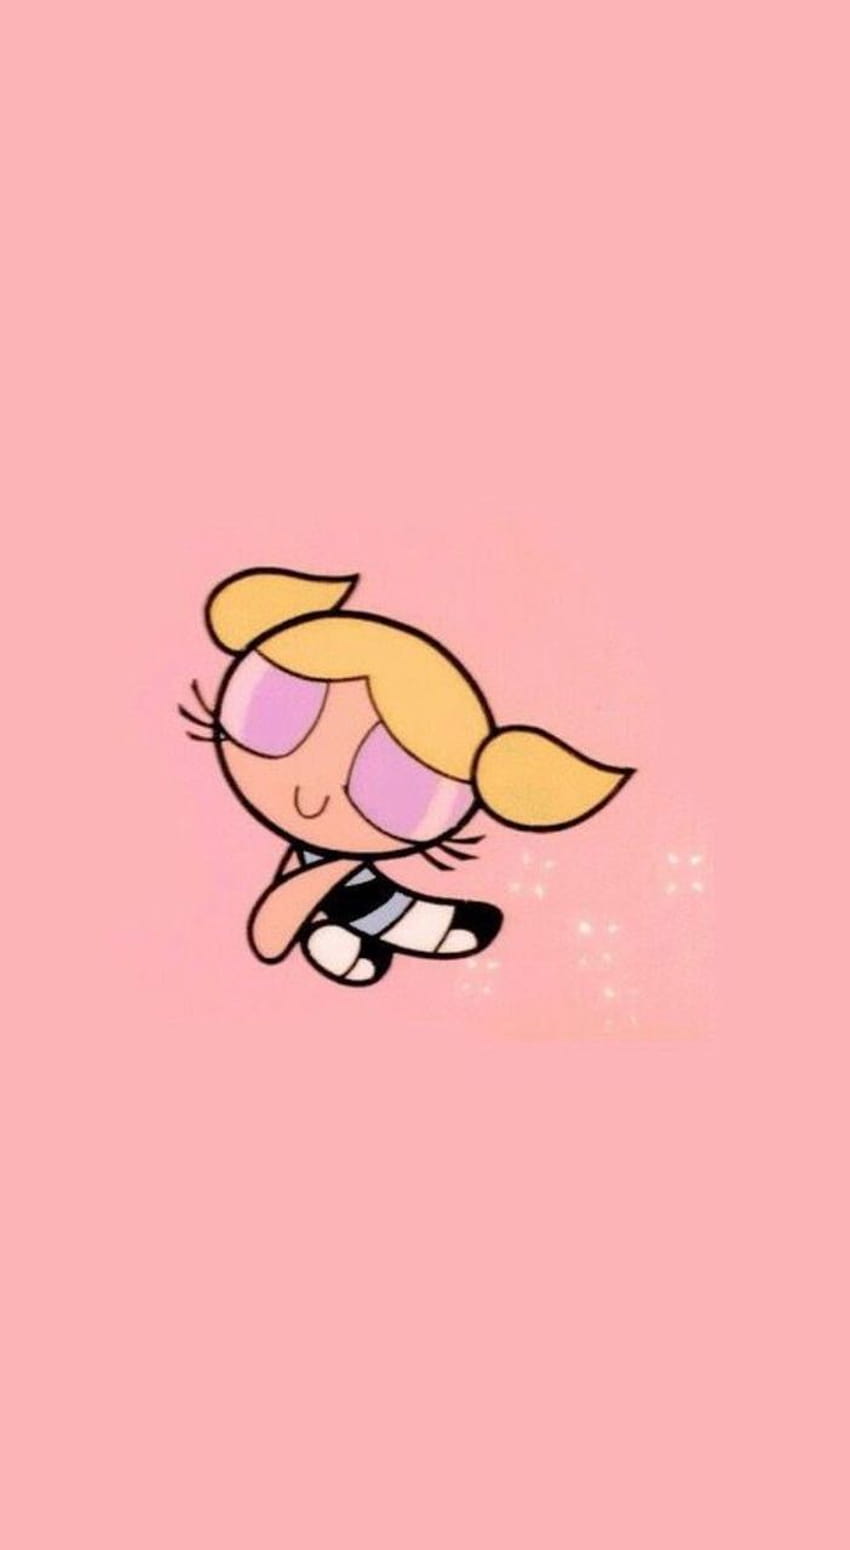 It's a cute of Bubbles from PowerPuff Girls in an aesthetic pink bg, powerpuff girls aesthetic HD phone wallpaper